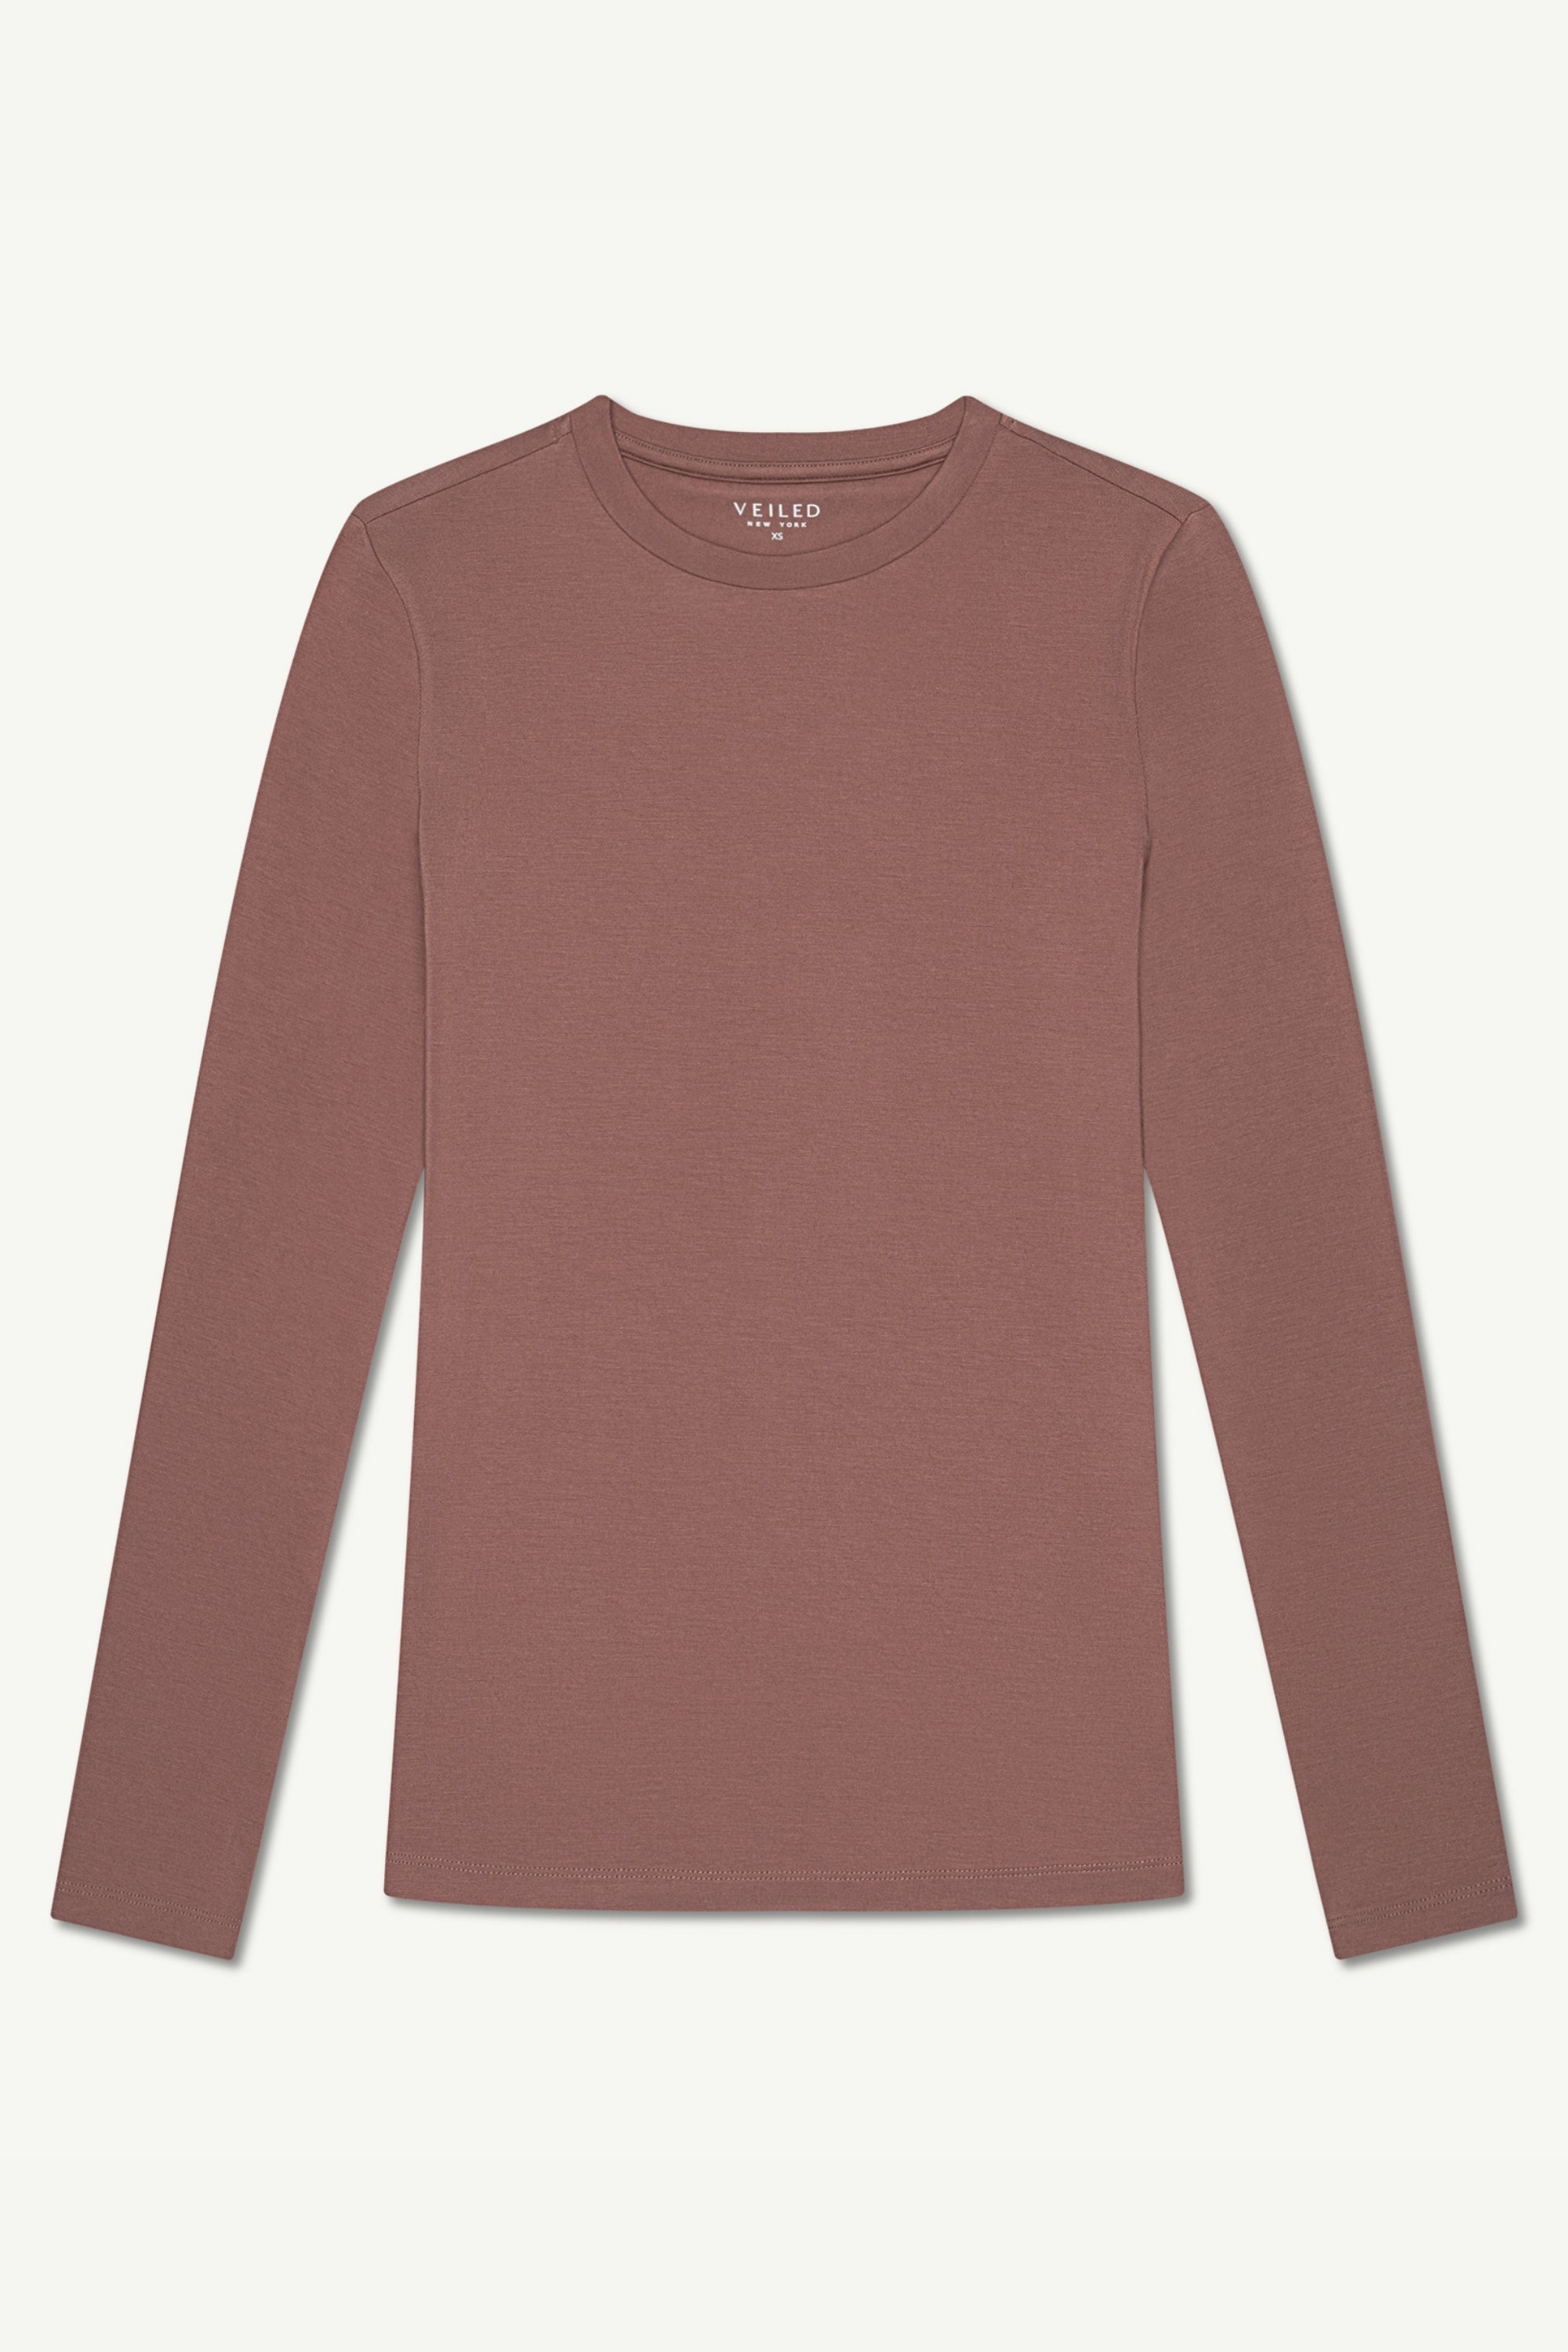 Essential Crew Neck Bamboo Jersey Top - Deep Taupe Clothing Veiled 